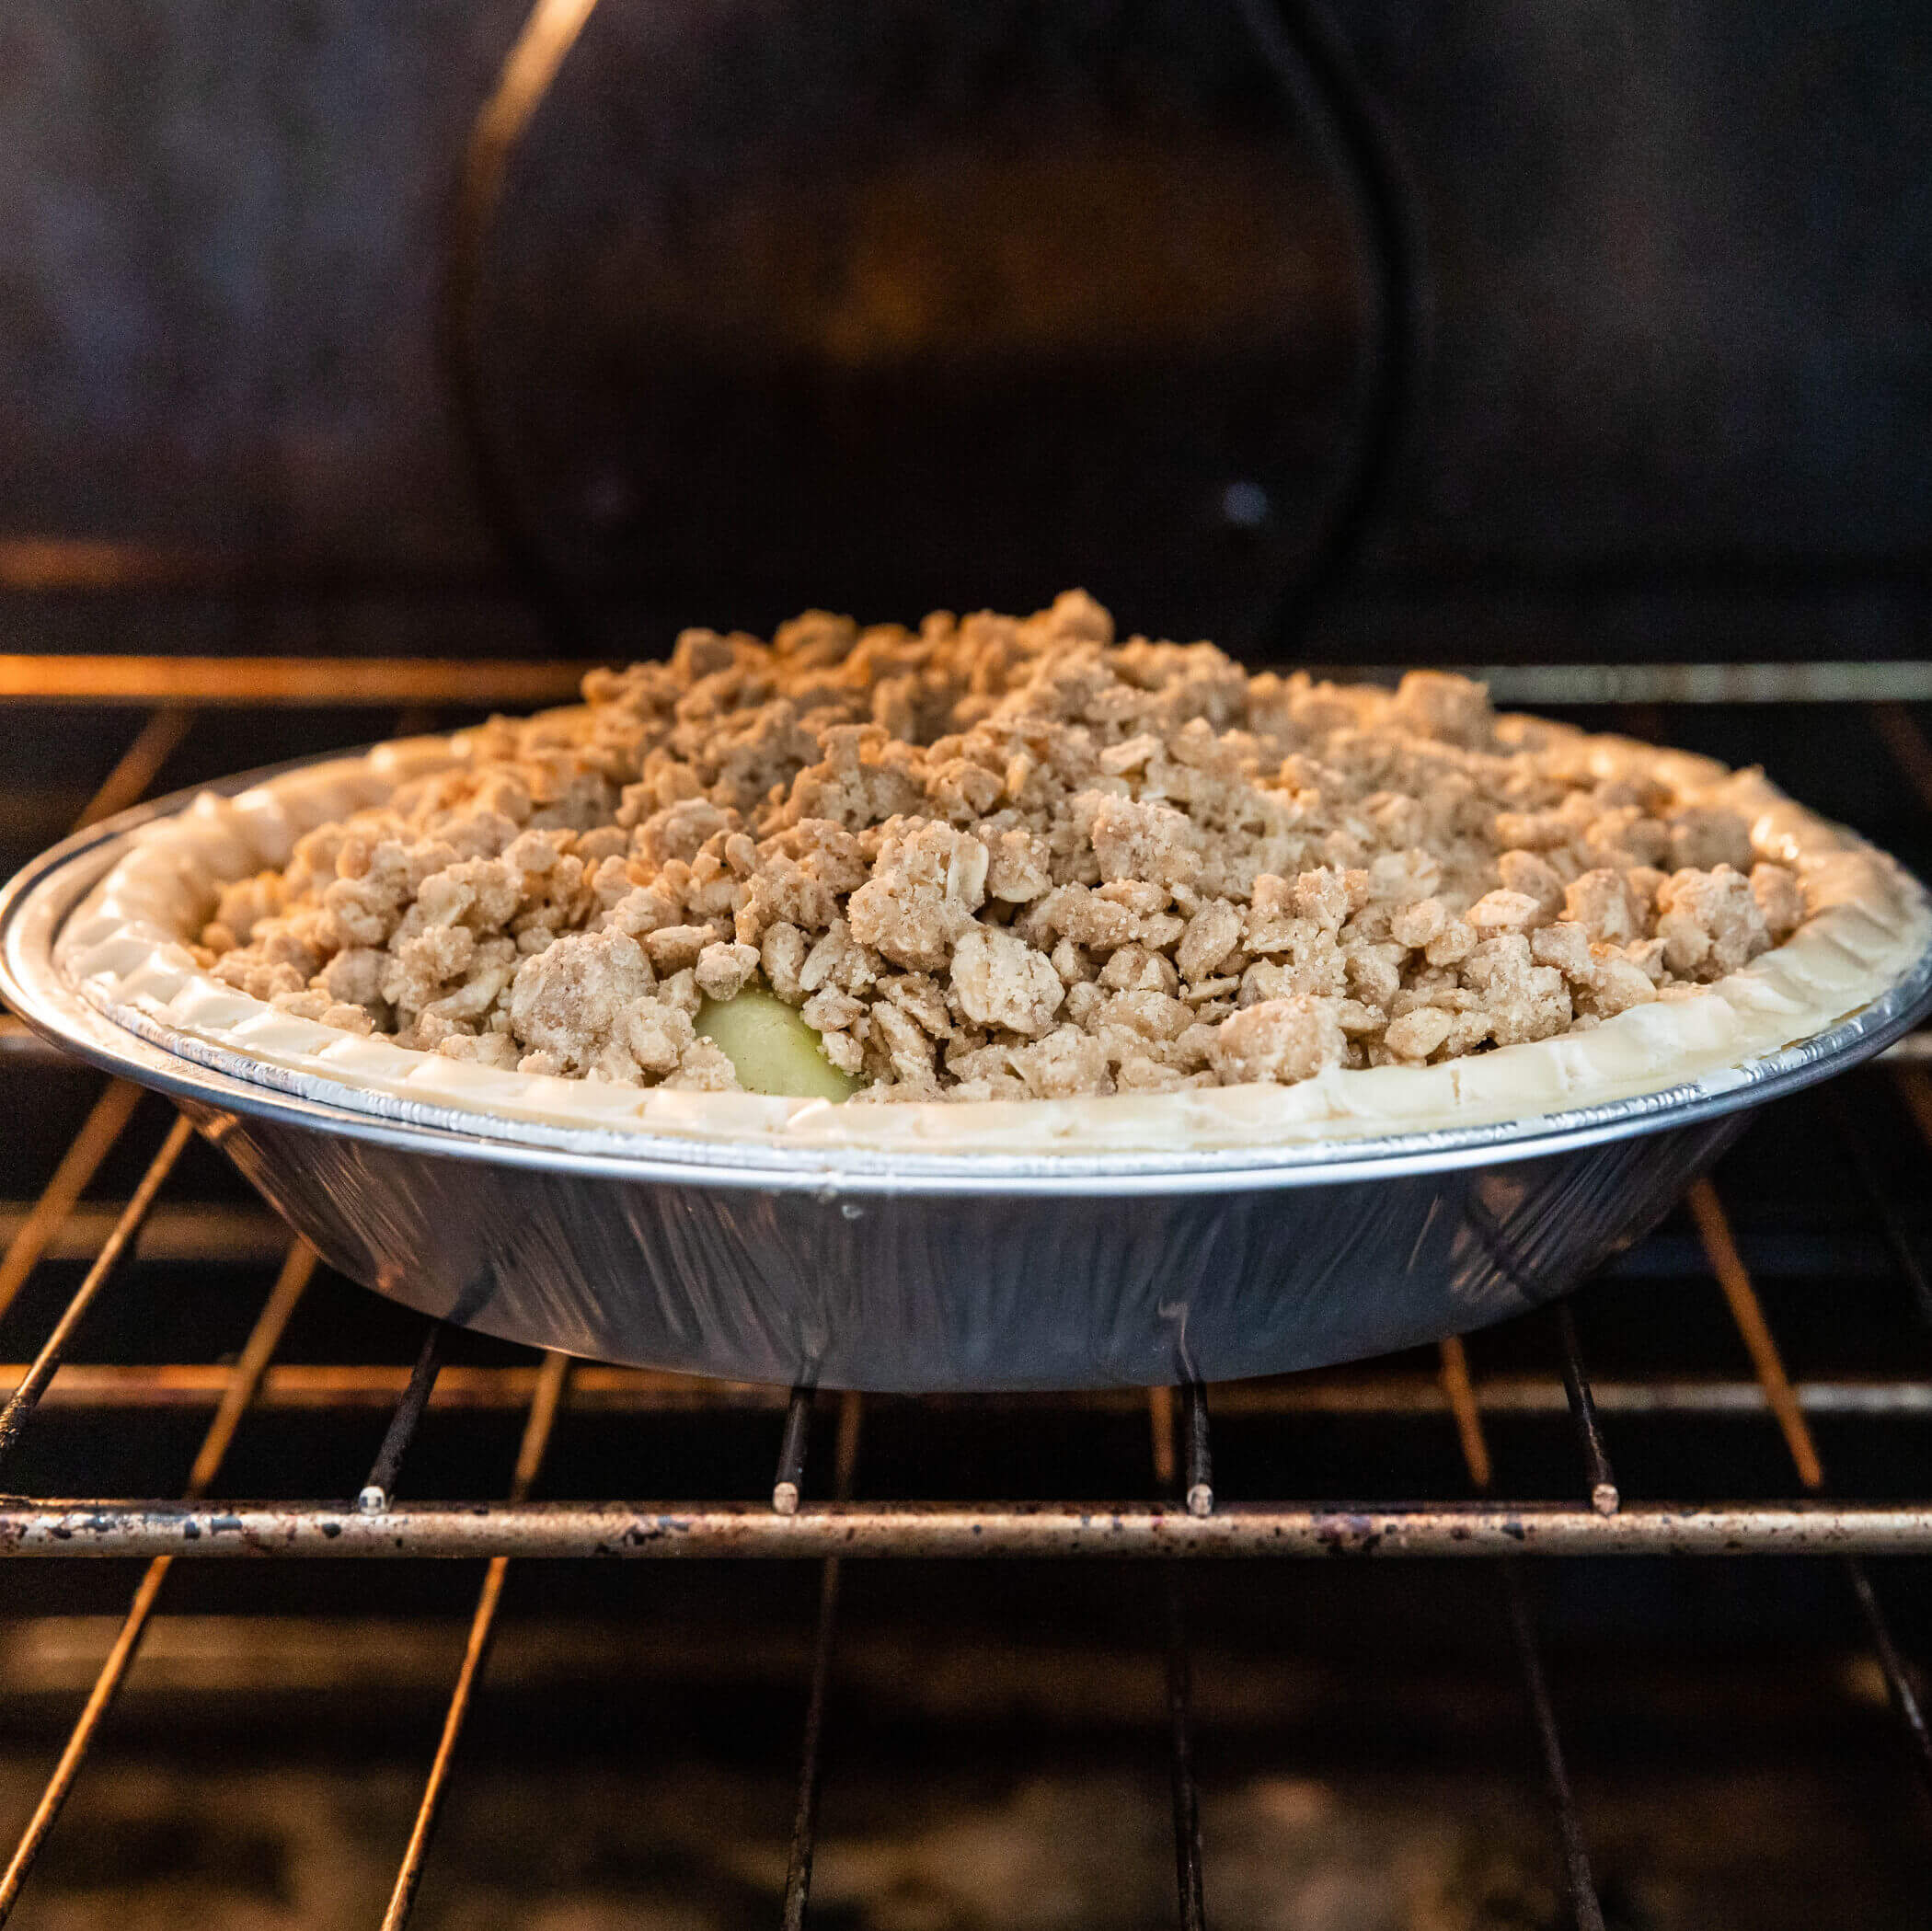 Apple Streusel Pie being baked in the oven